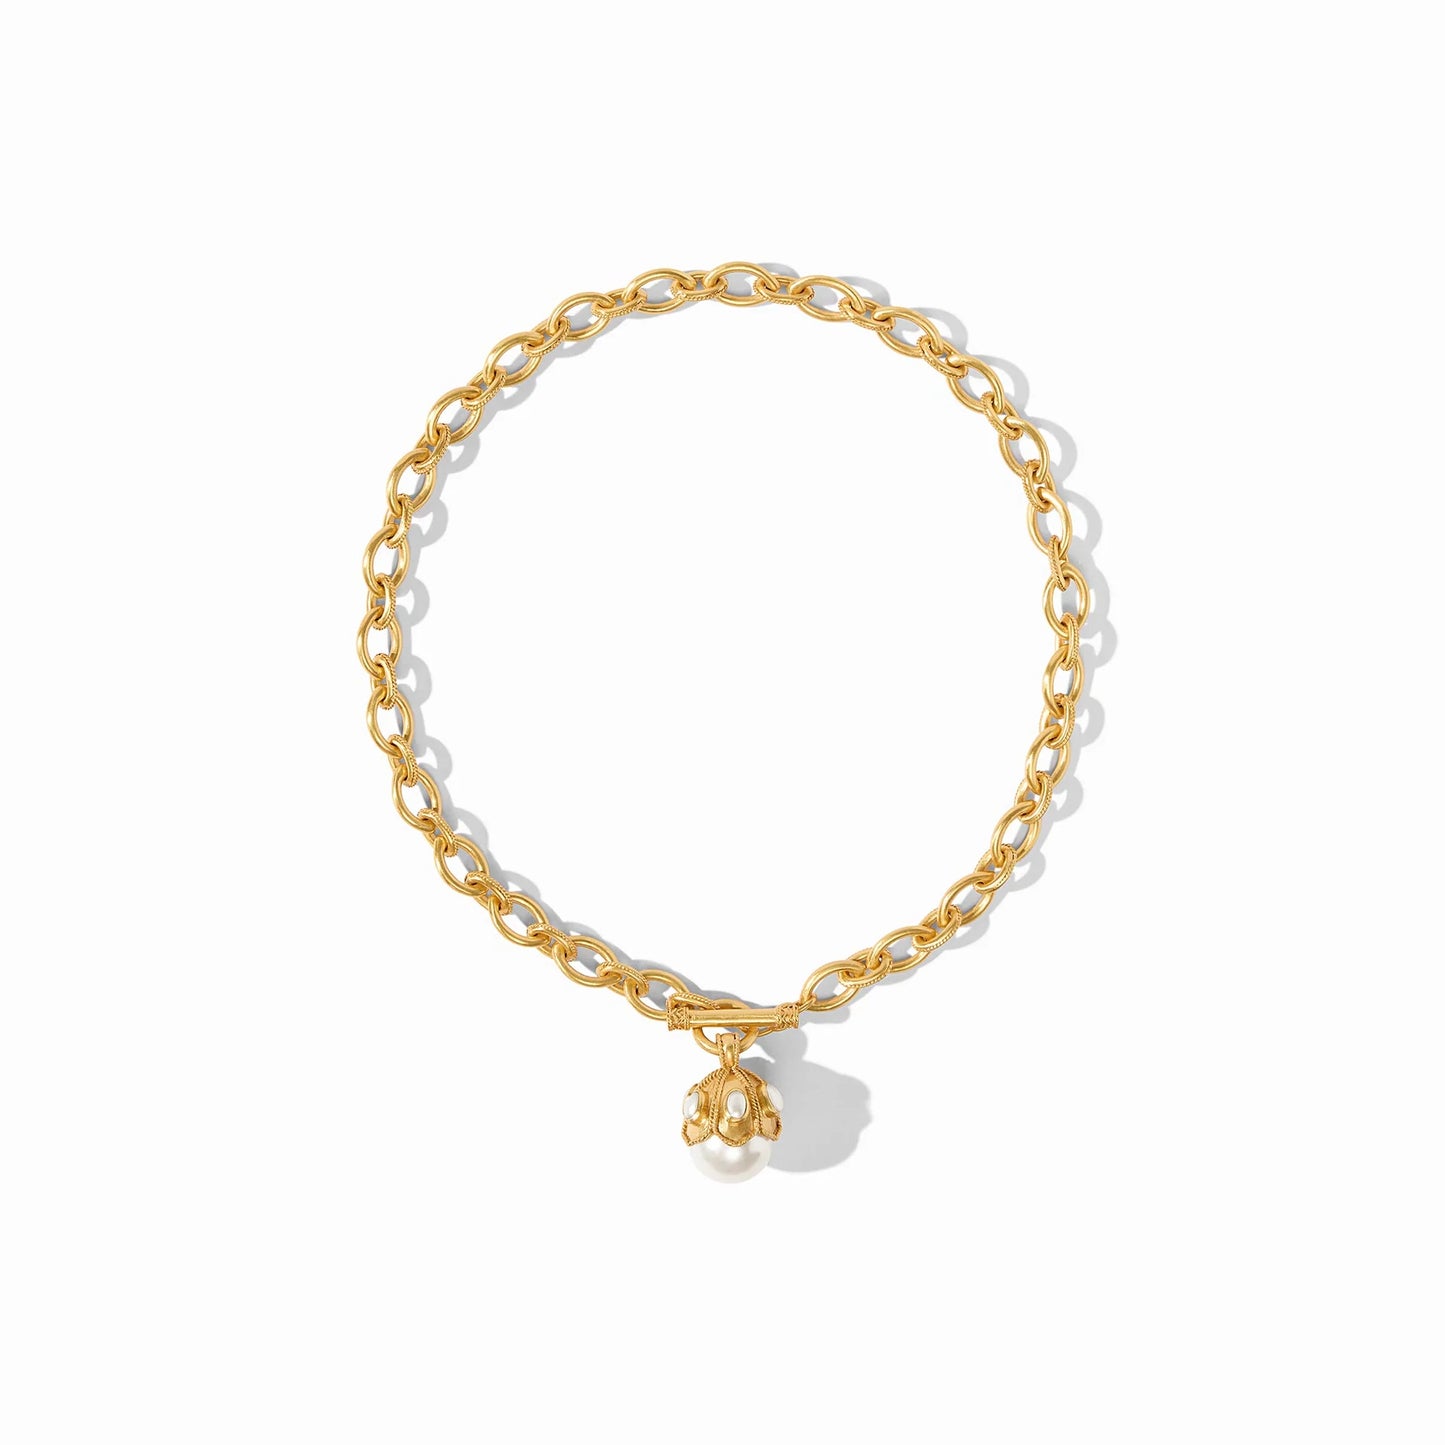 Delphine Pearl Statement Necklace, Gold/Pearl, Julie Vos